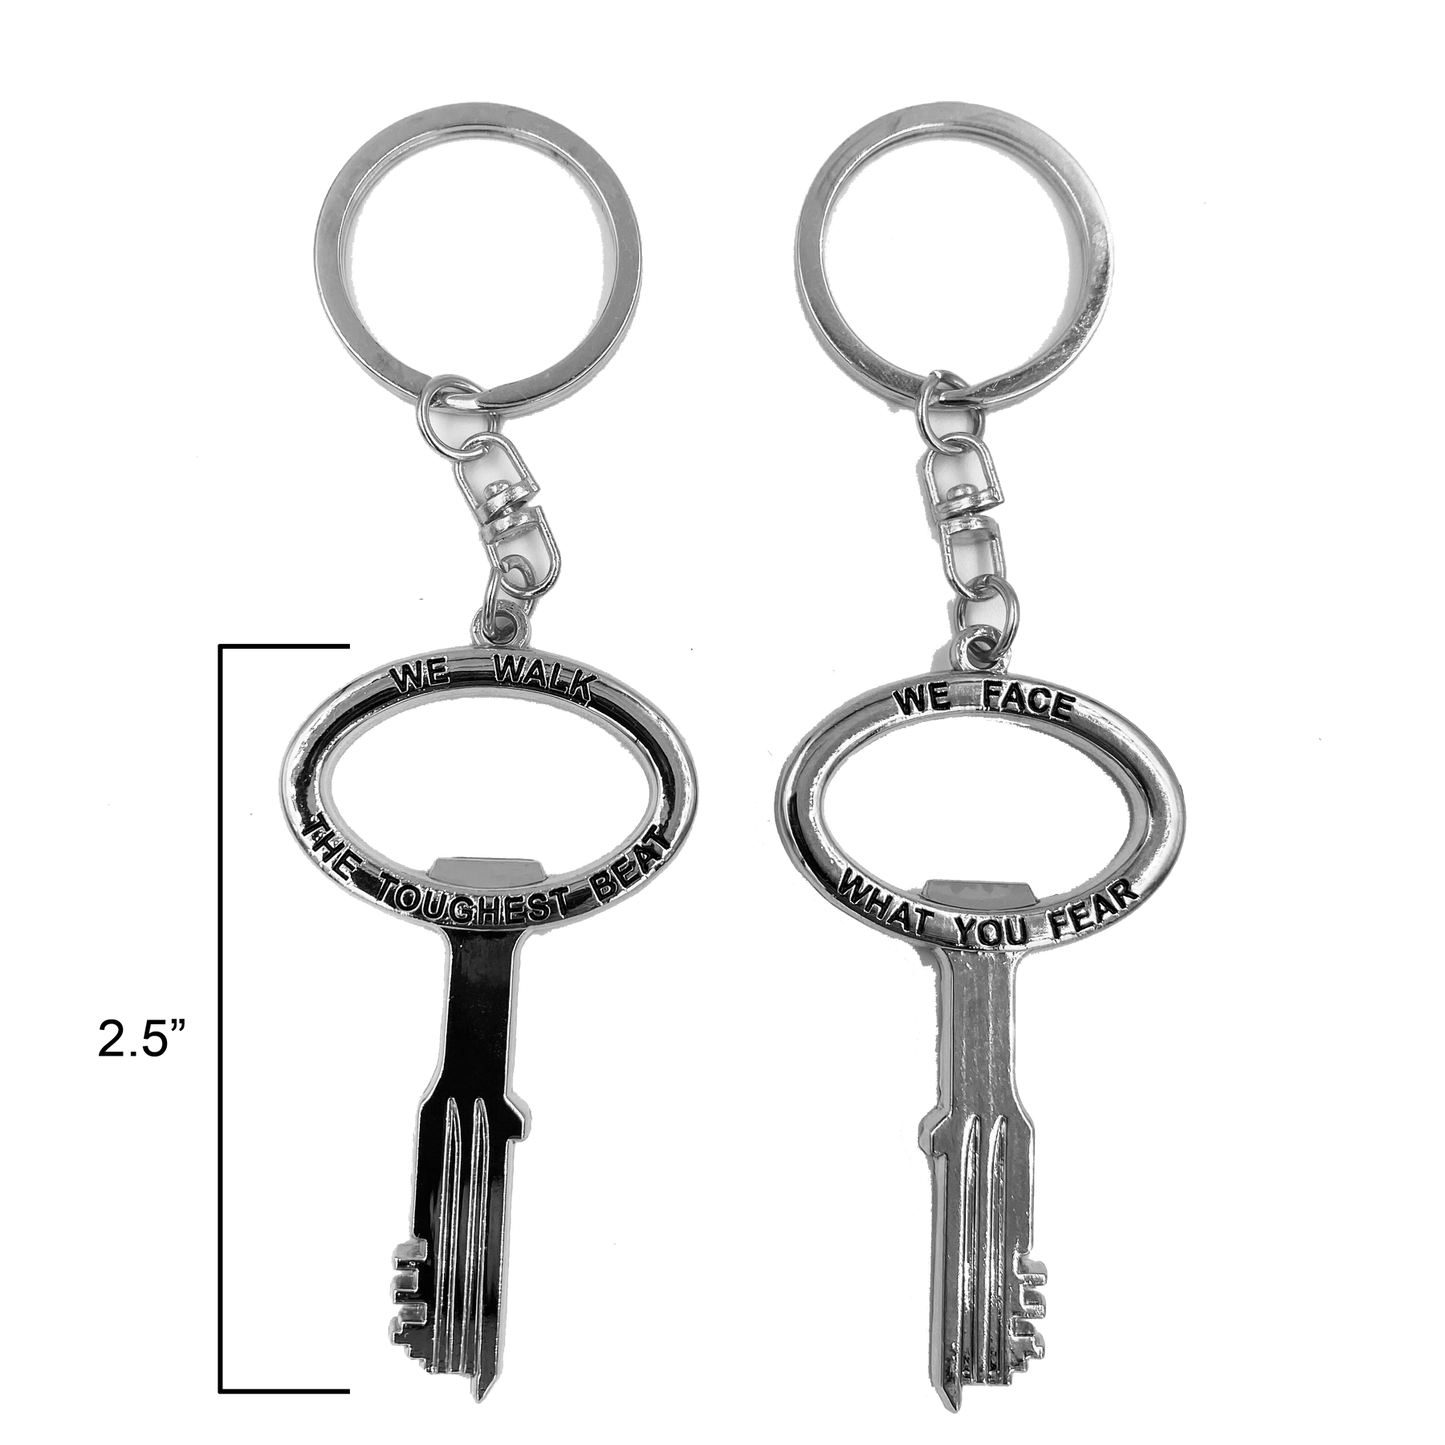 EE-021 Silver Prison Jail Key bottle opener keychain challenge coin Correctional Officer CO Corrections thin gray line